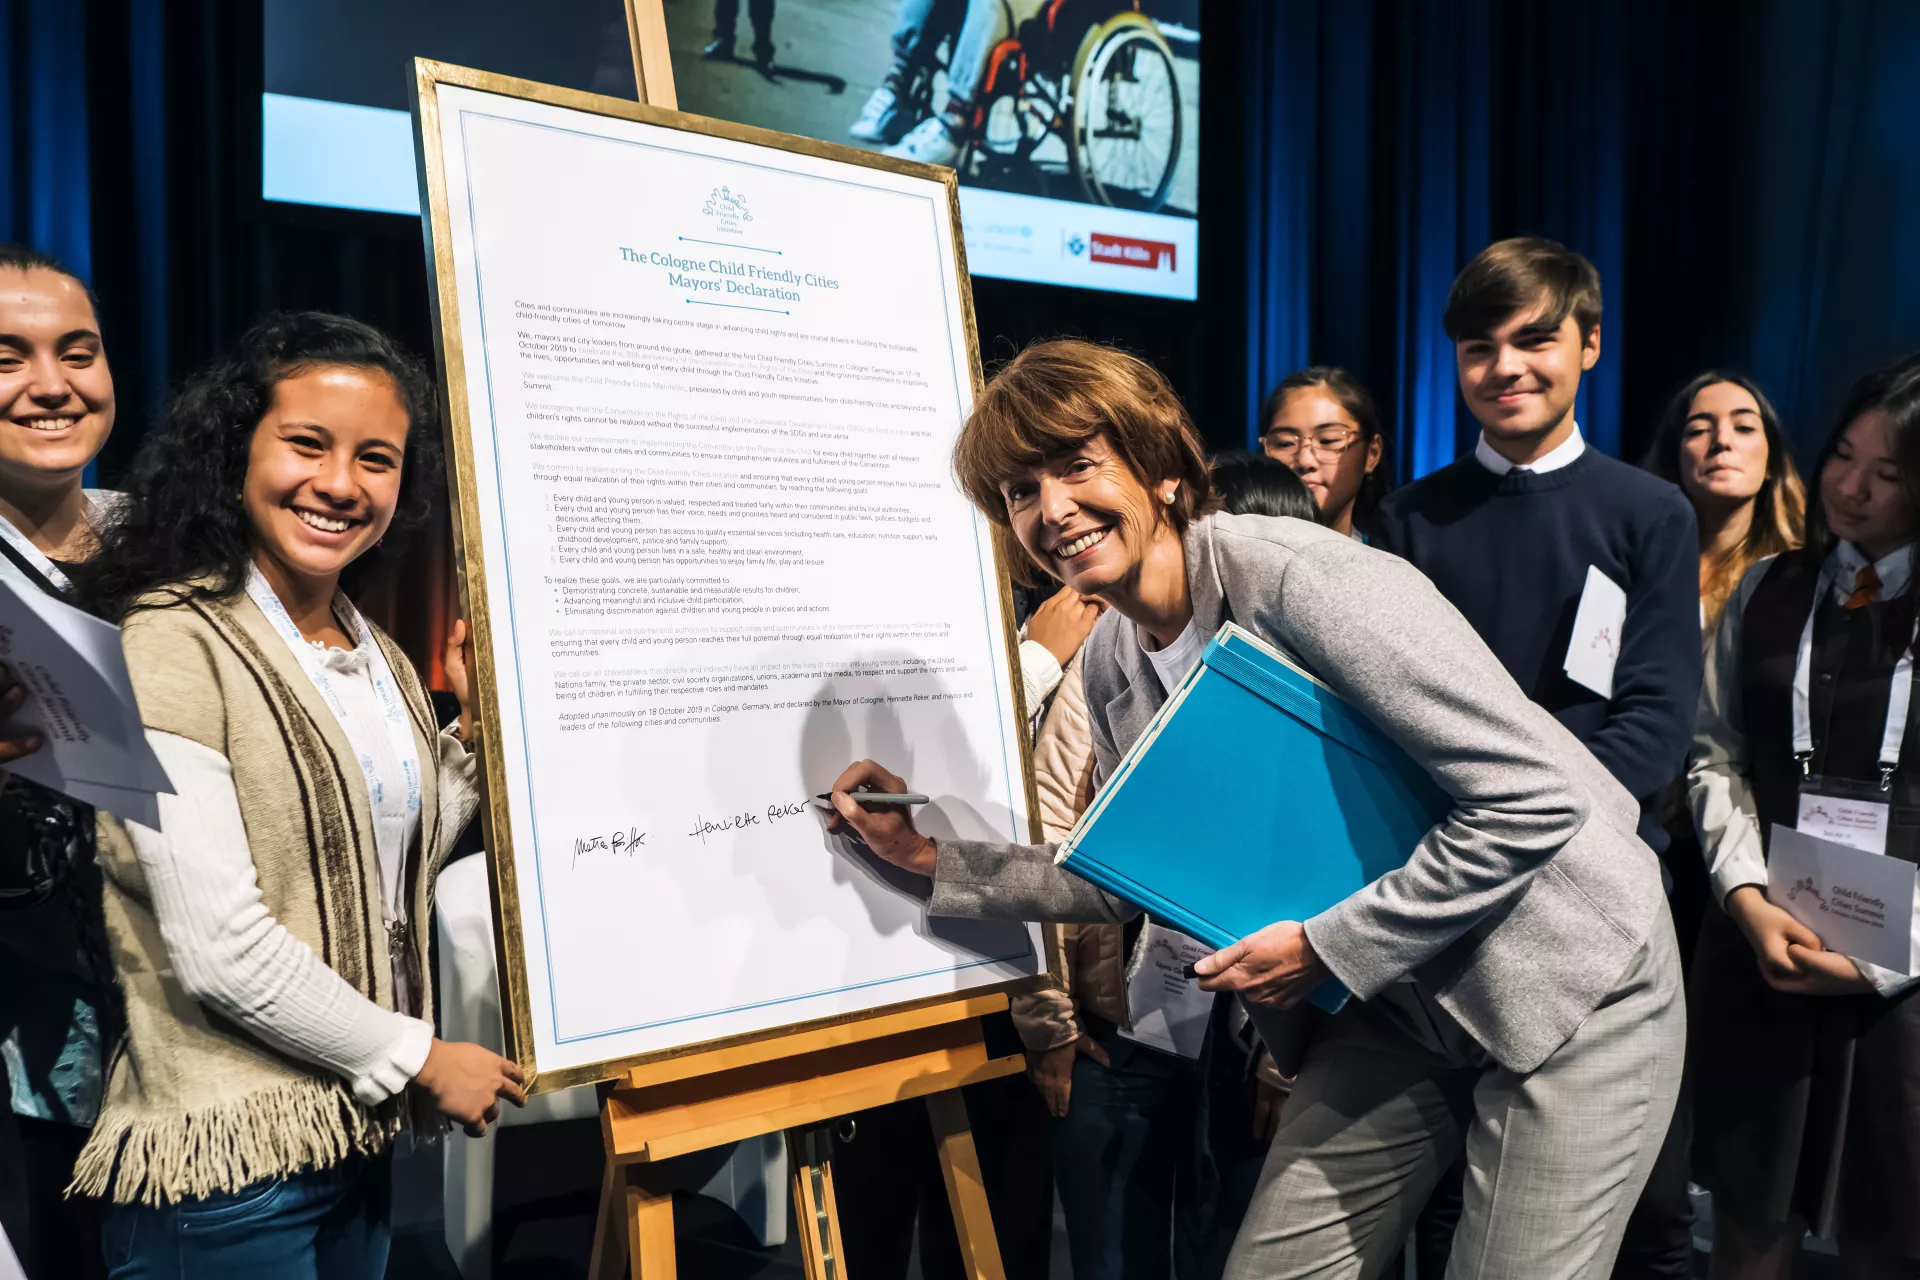 Germany, Cologne, 18.10.2019 - Lord Mayor of Cologne, Henriette Reker, signing the mayors declaration.